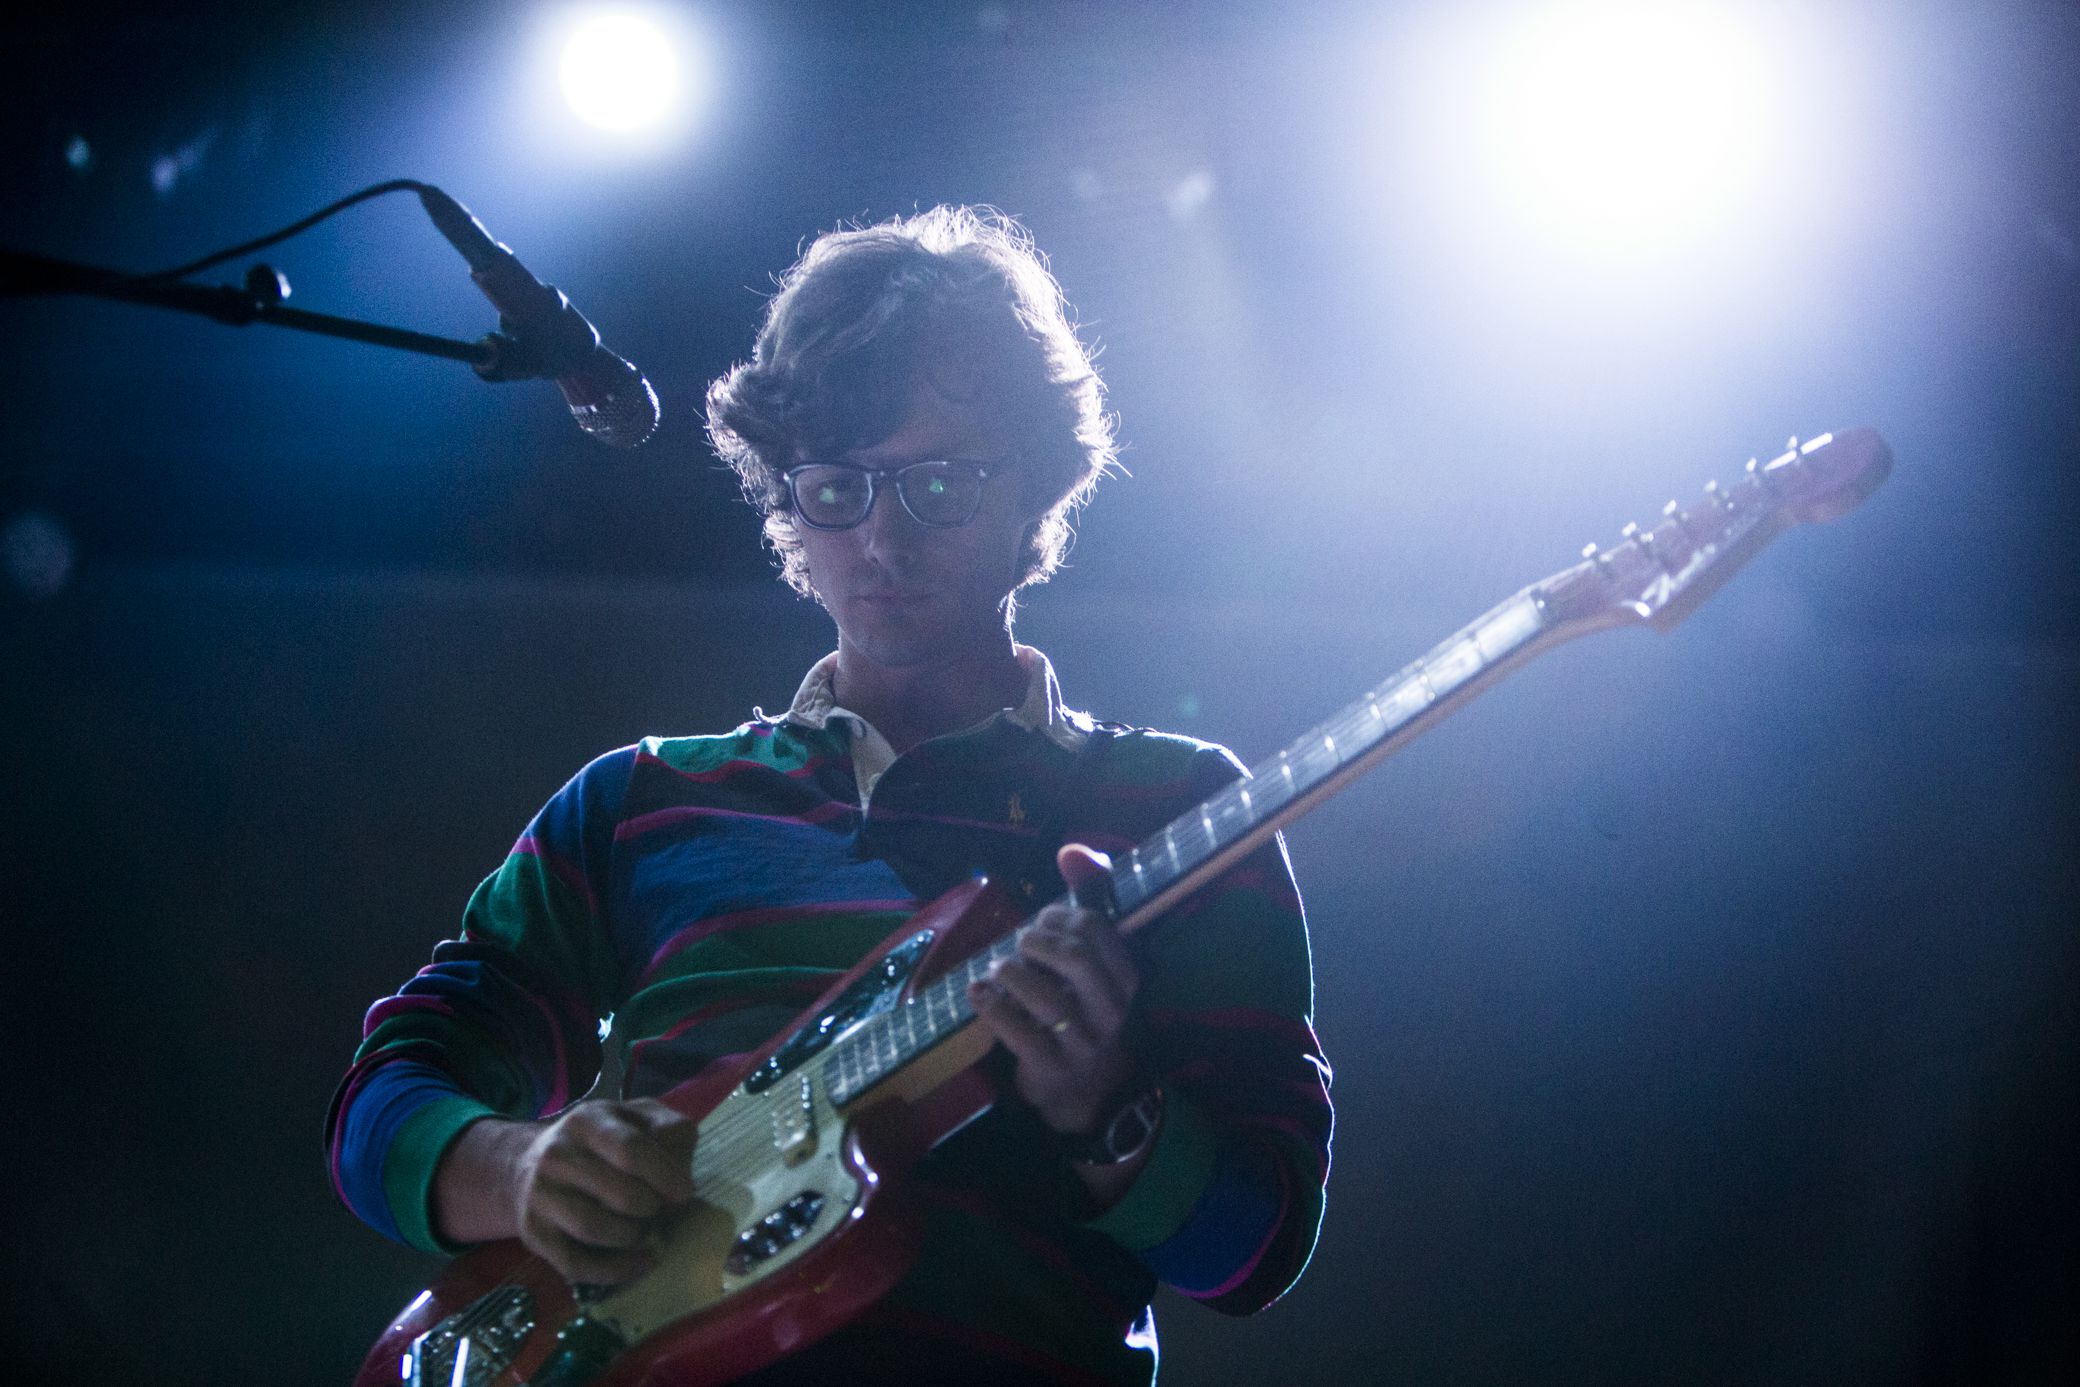 deerhunter 7 Live Review: Interpols Turn on the Bright Lights Turns 15 in Los Angeles (9/30)